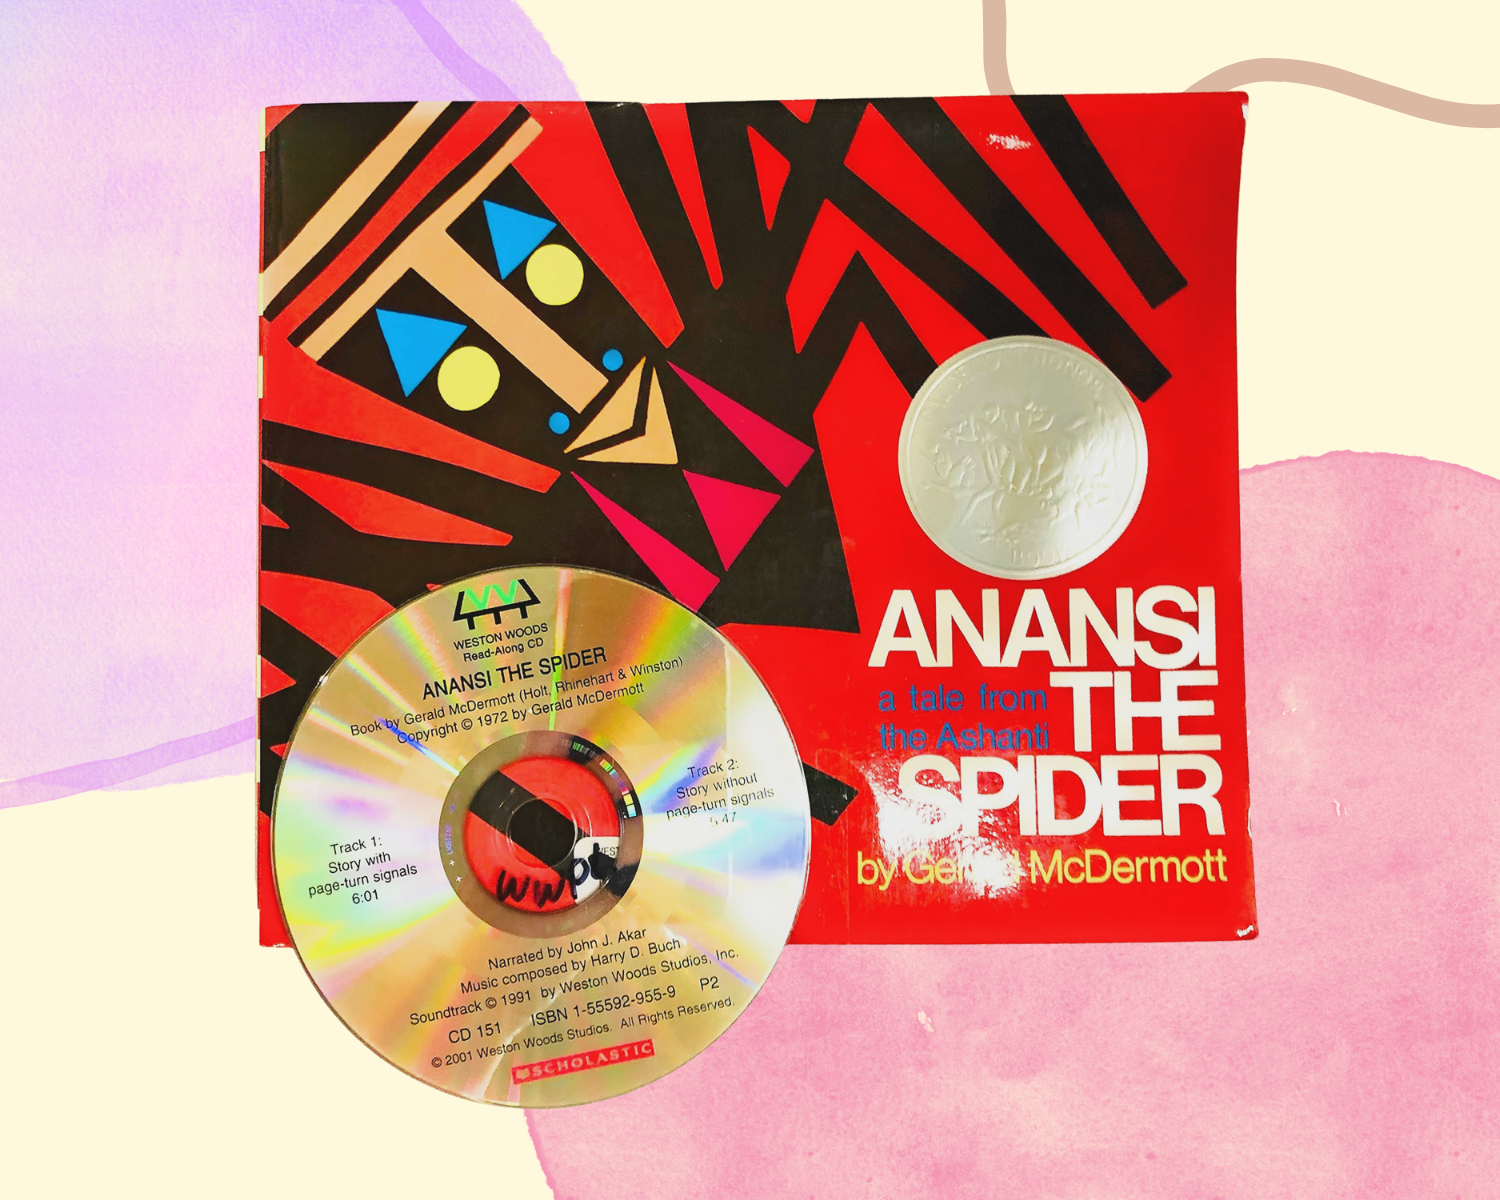 image of Anansi the Spider book and cd